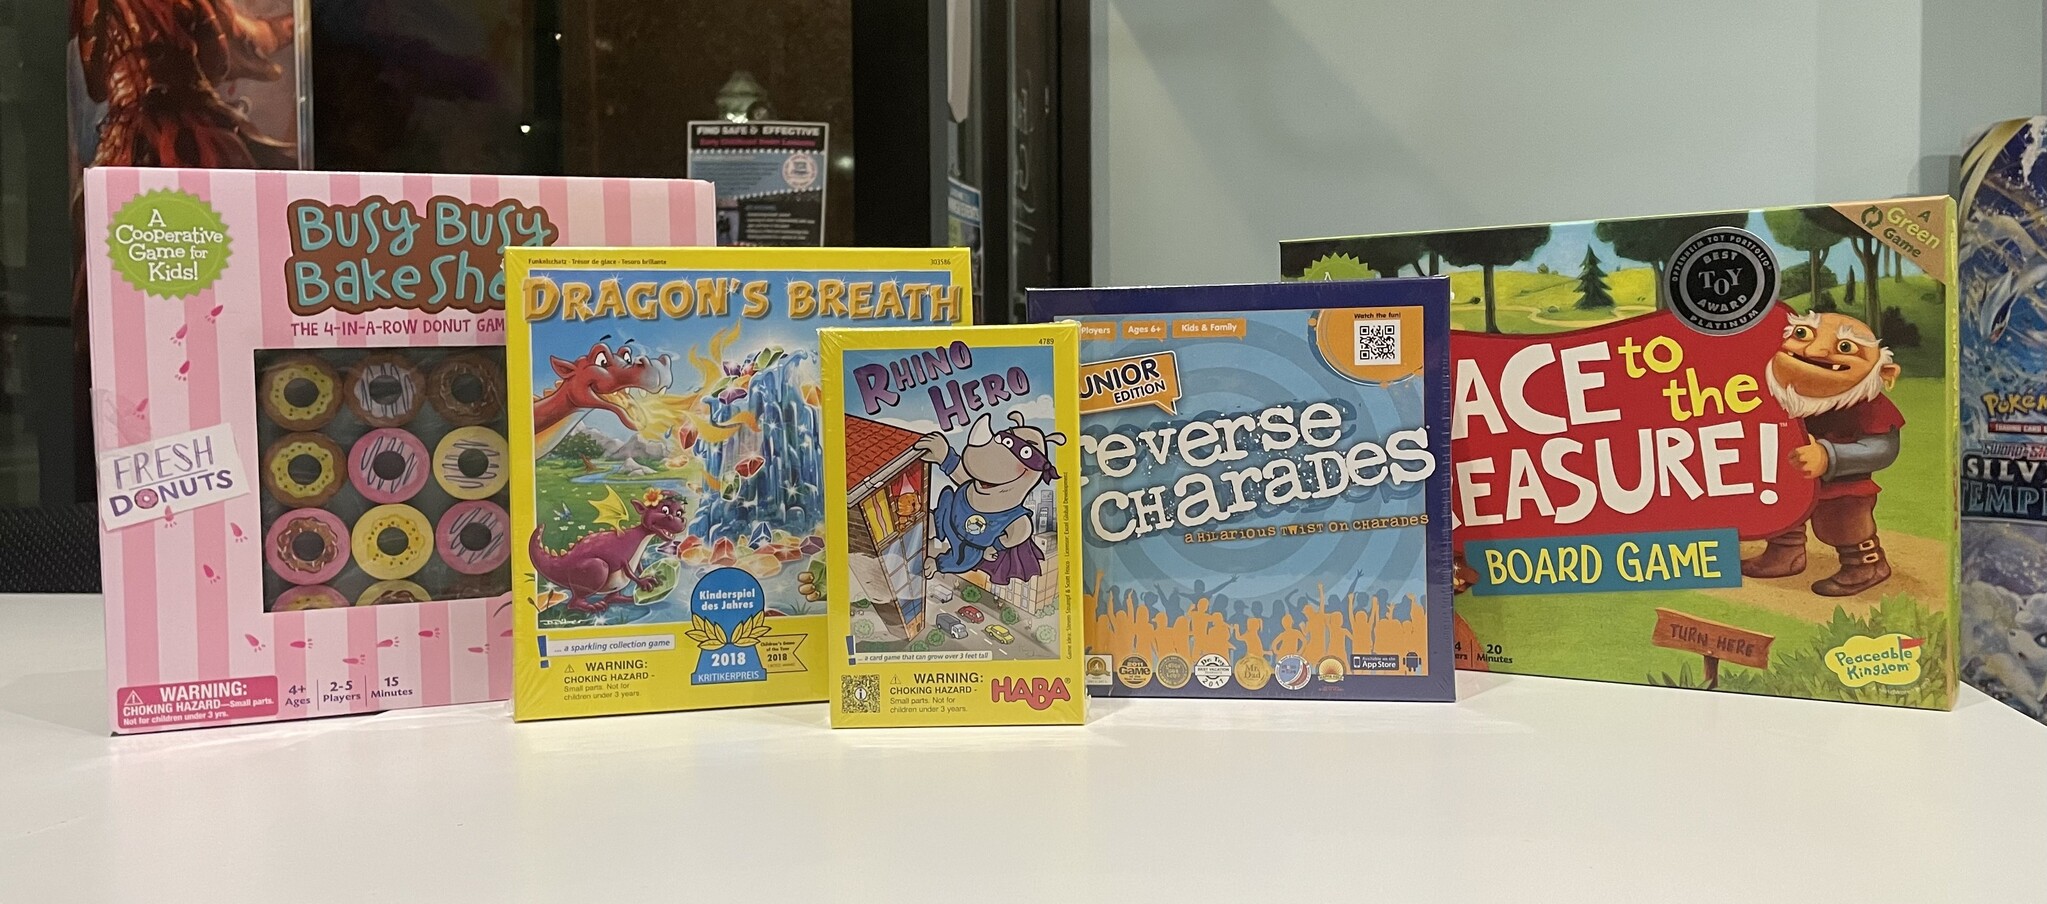 Five Great Kids Games For The Whole Family!